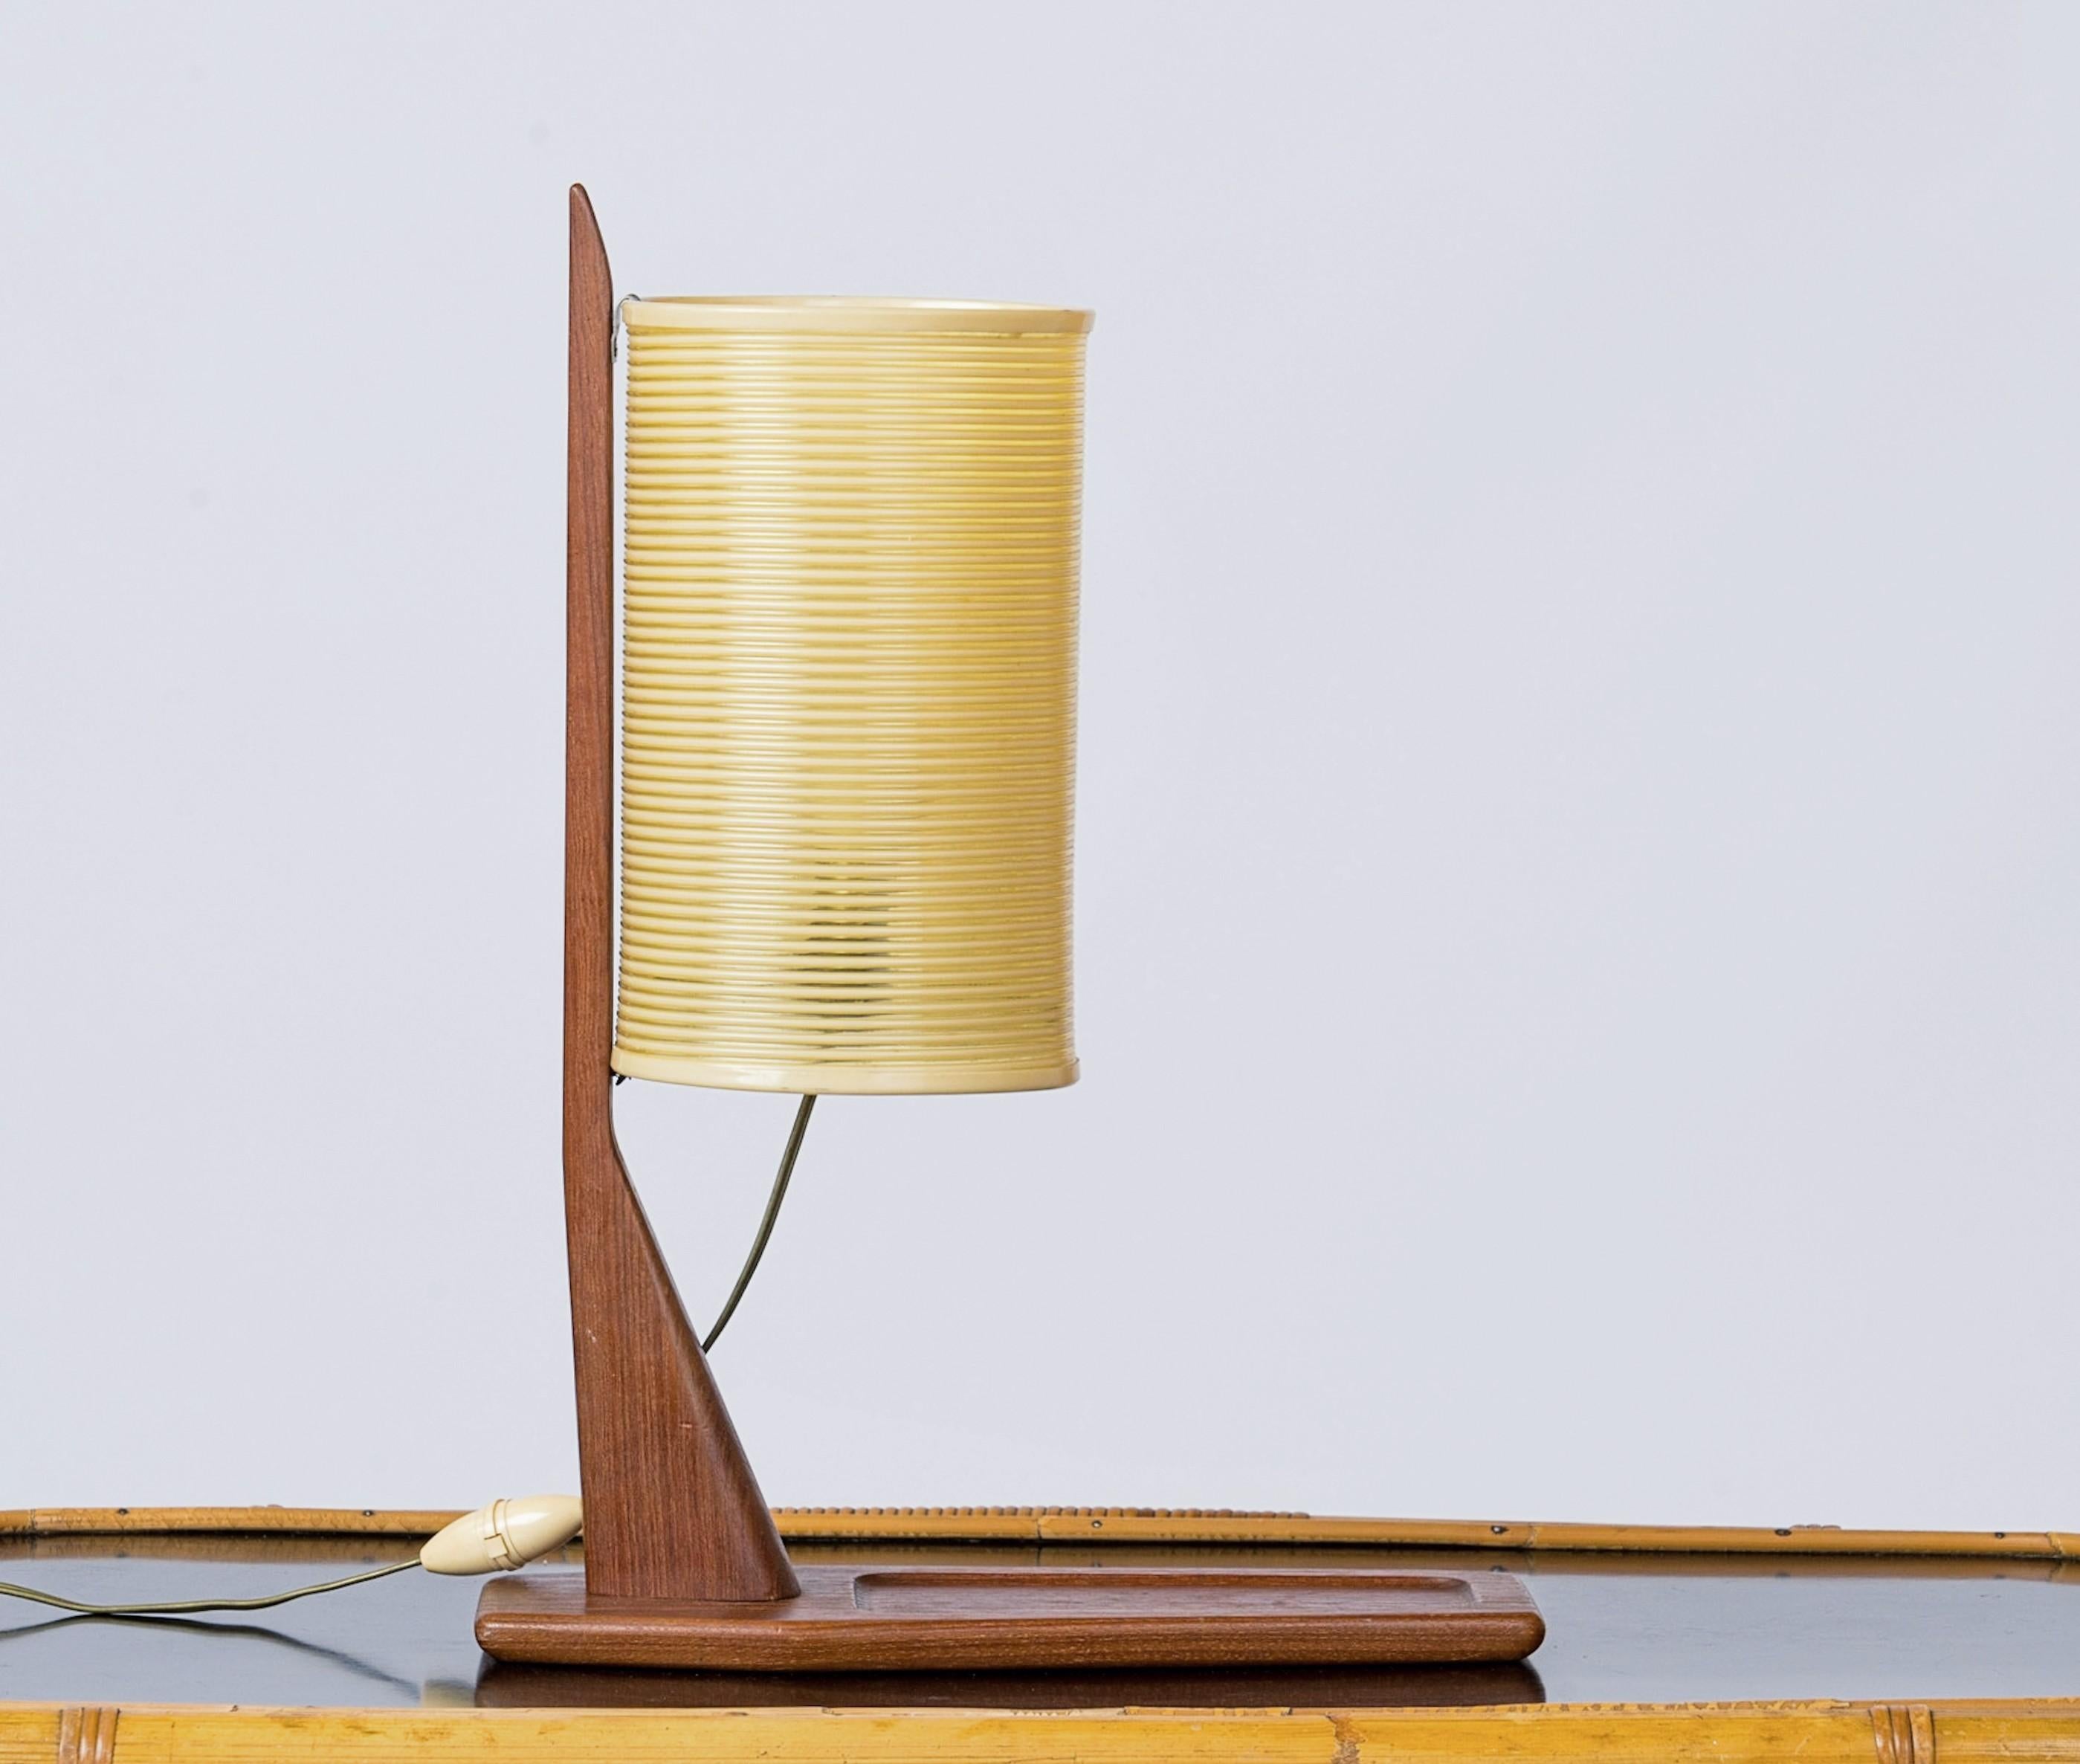 One of a kind desk lamp in teak wood with Rotaflex shade
Base features an embossed catch all section
minor repair on pole (shown on picture)
shade has a slightly oval shape
European socket and wiring
This lamp will ship from France and can be